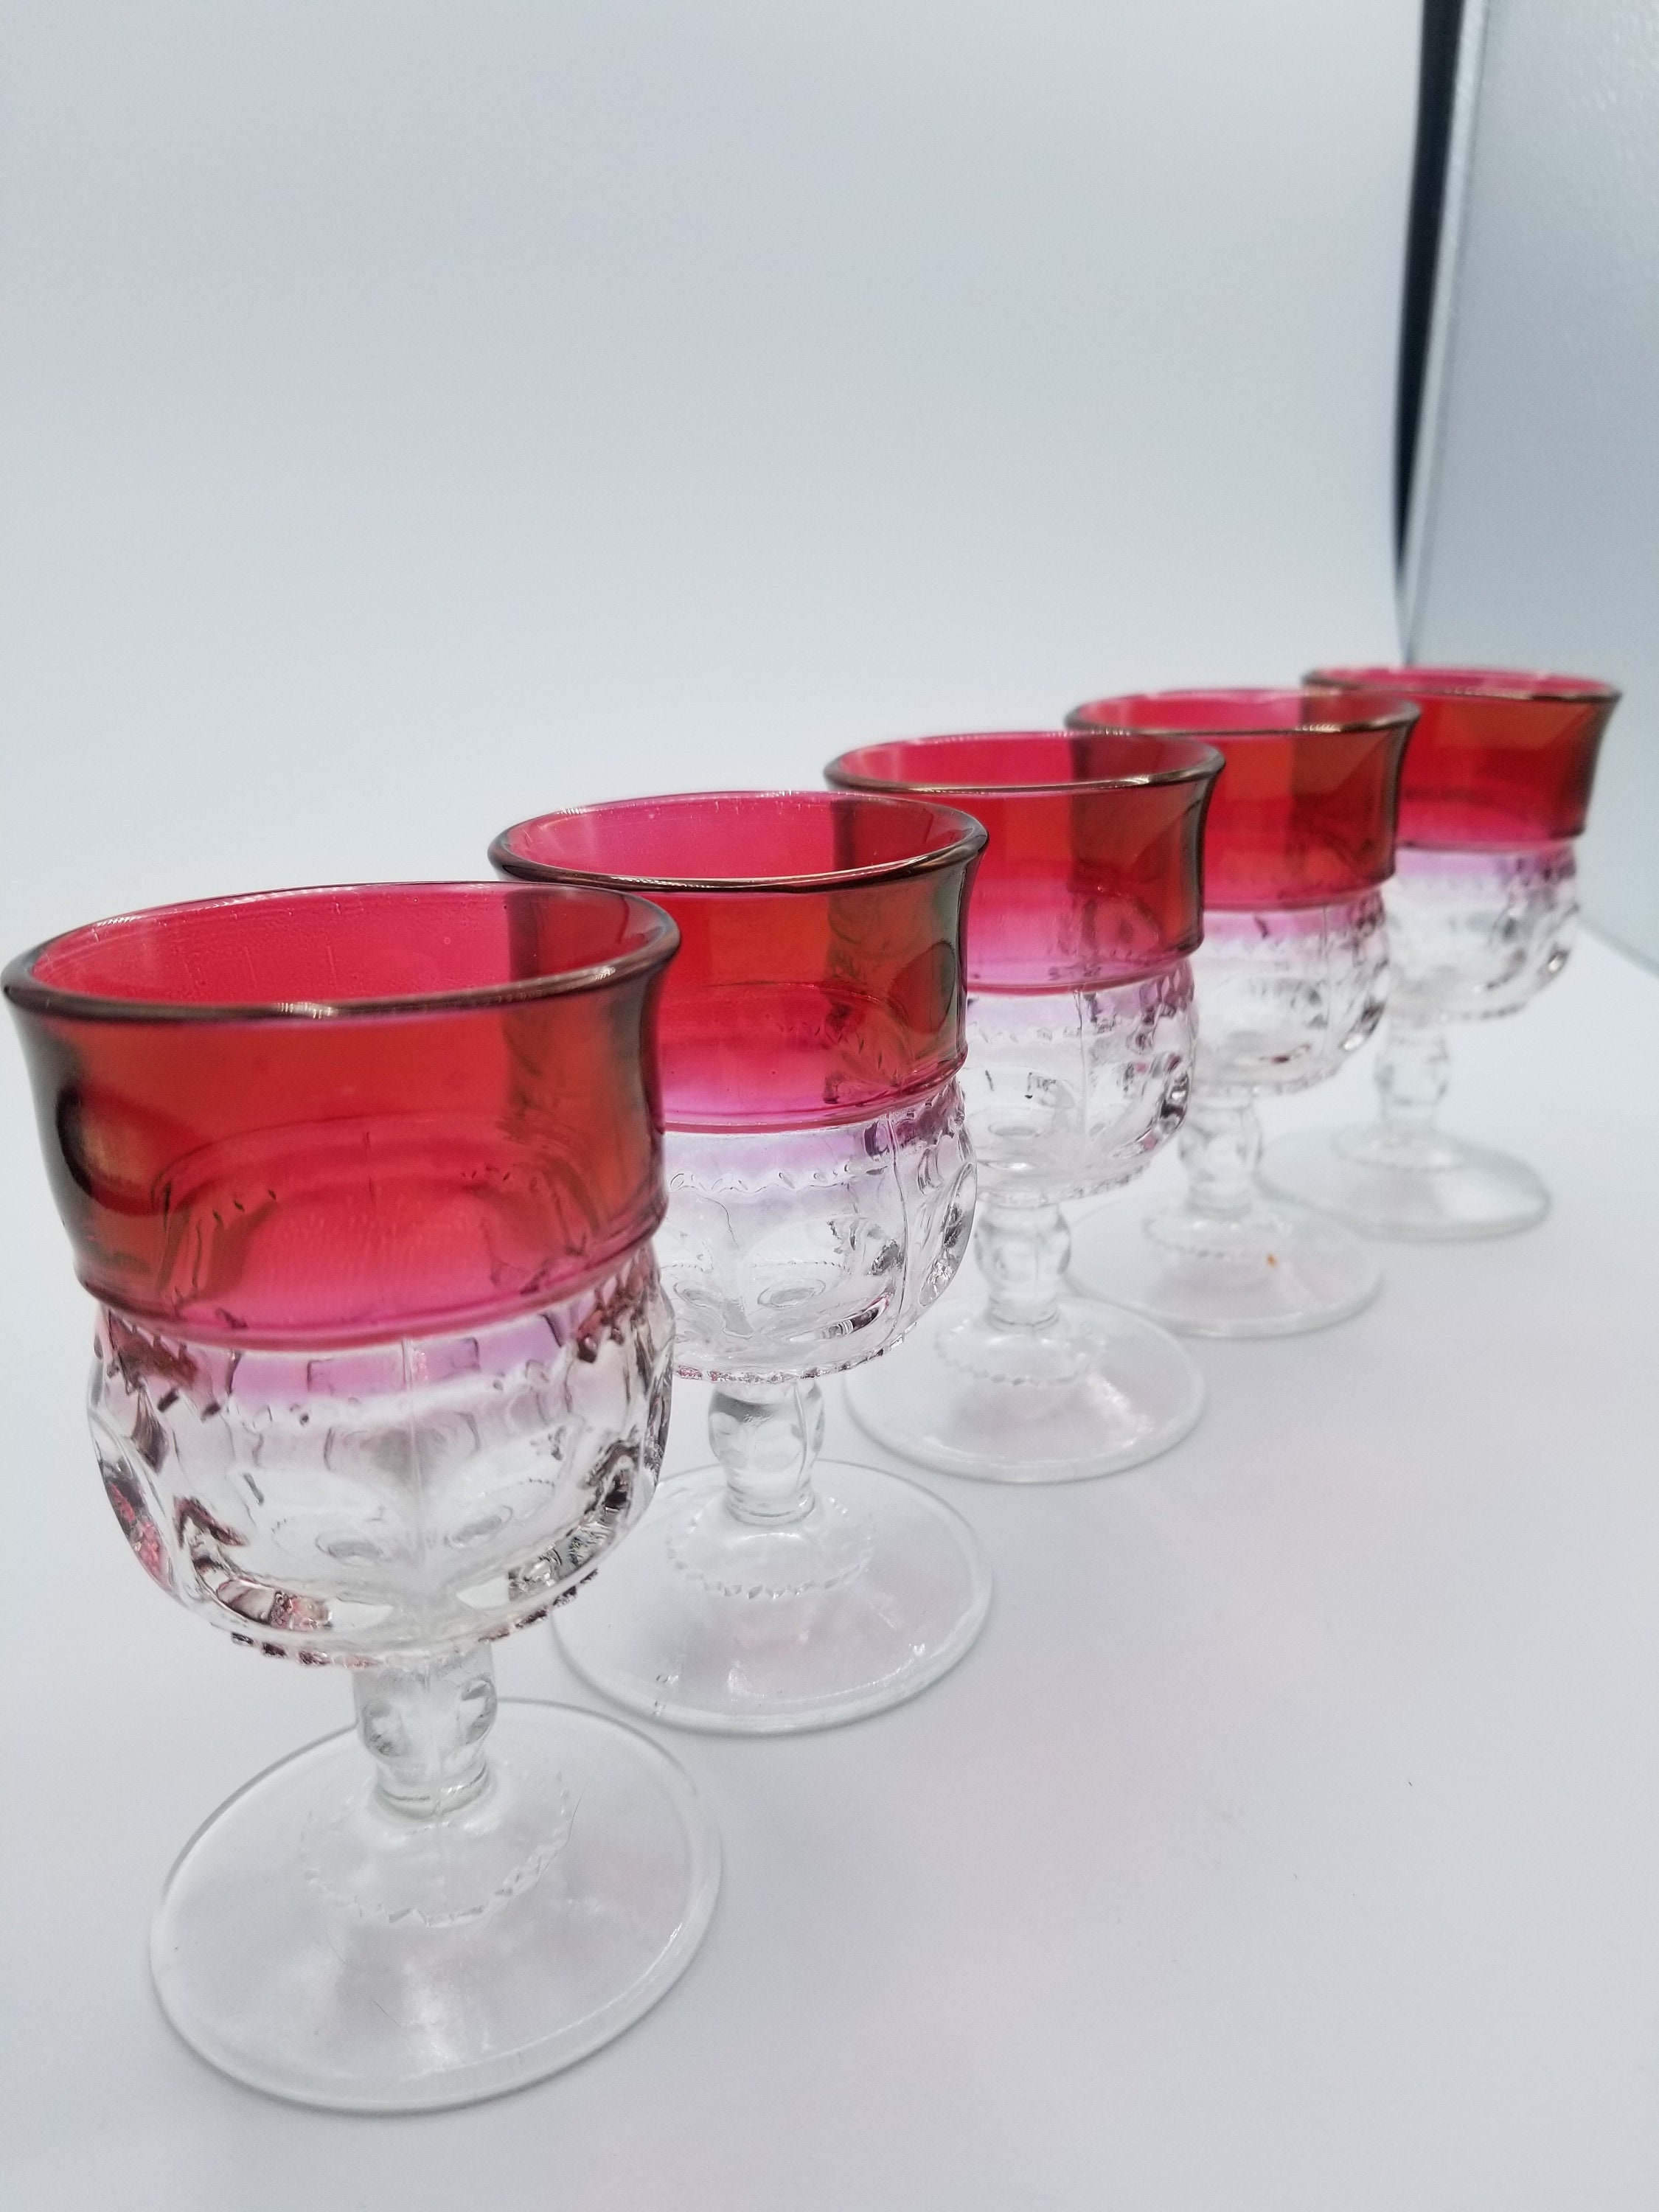 Set of 4 Wine Glasses, Kings Crown or Thumbprint Pattern, Ruby Flashed,  Vintage Colony Glass, Indiana Glass 